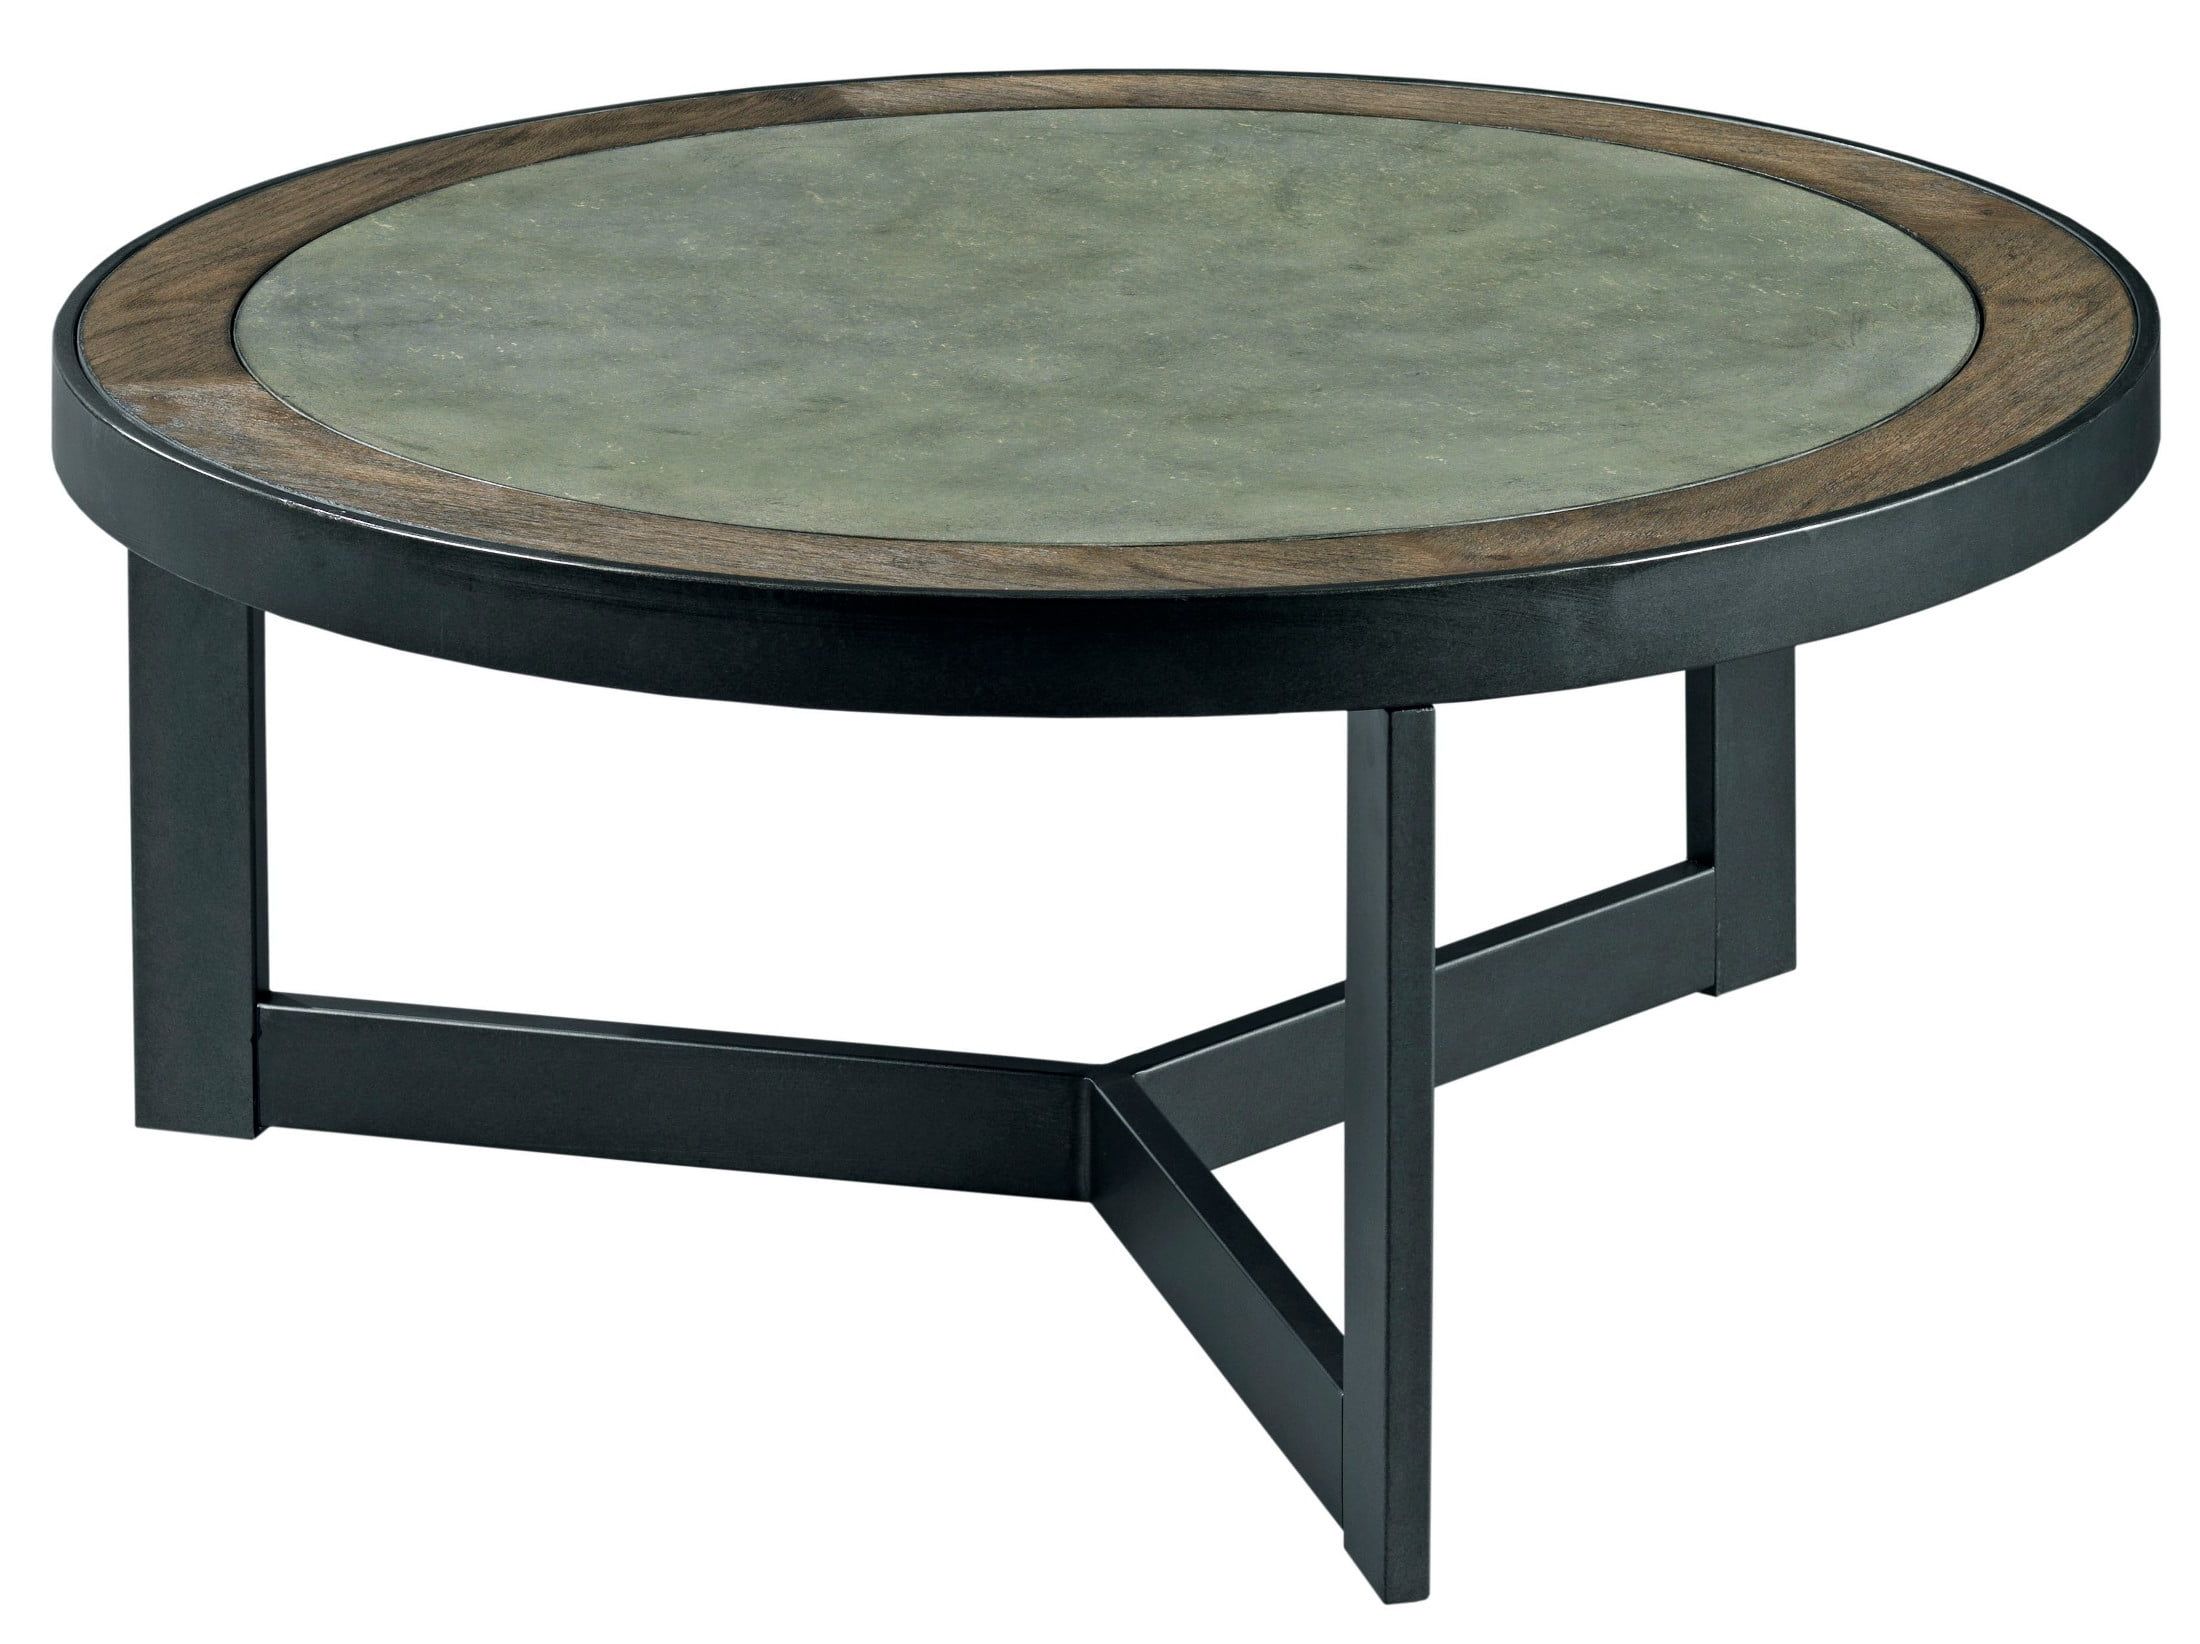 Graystone Dark Oak Round Cocktail Table From Hammary In Preferred Barnside Round Cocktail Tables (View 16 of 20)